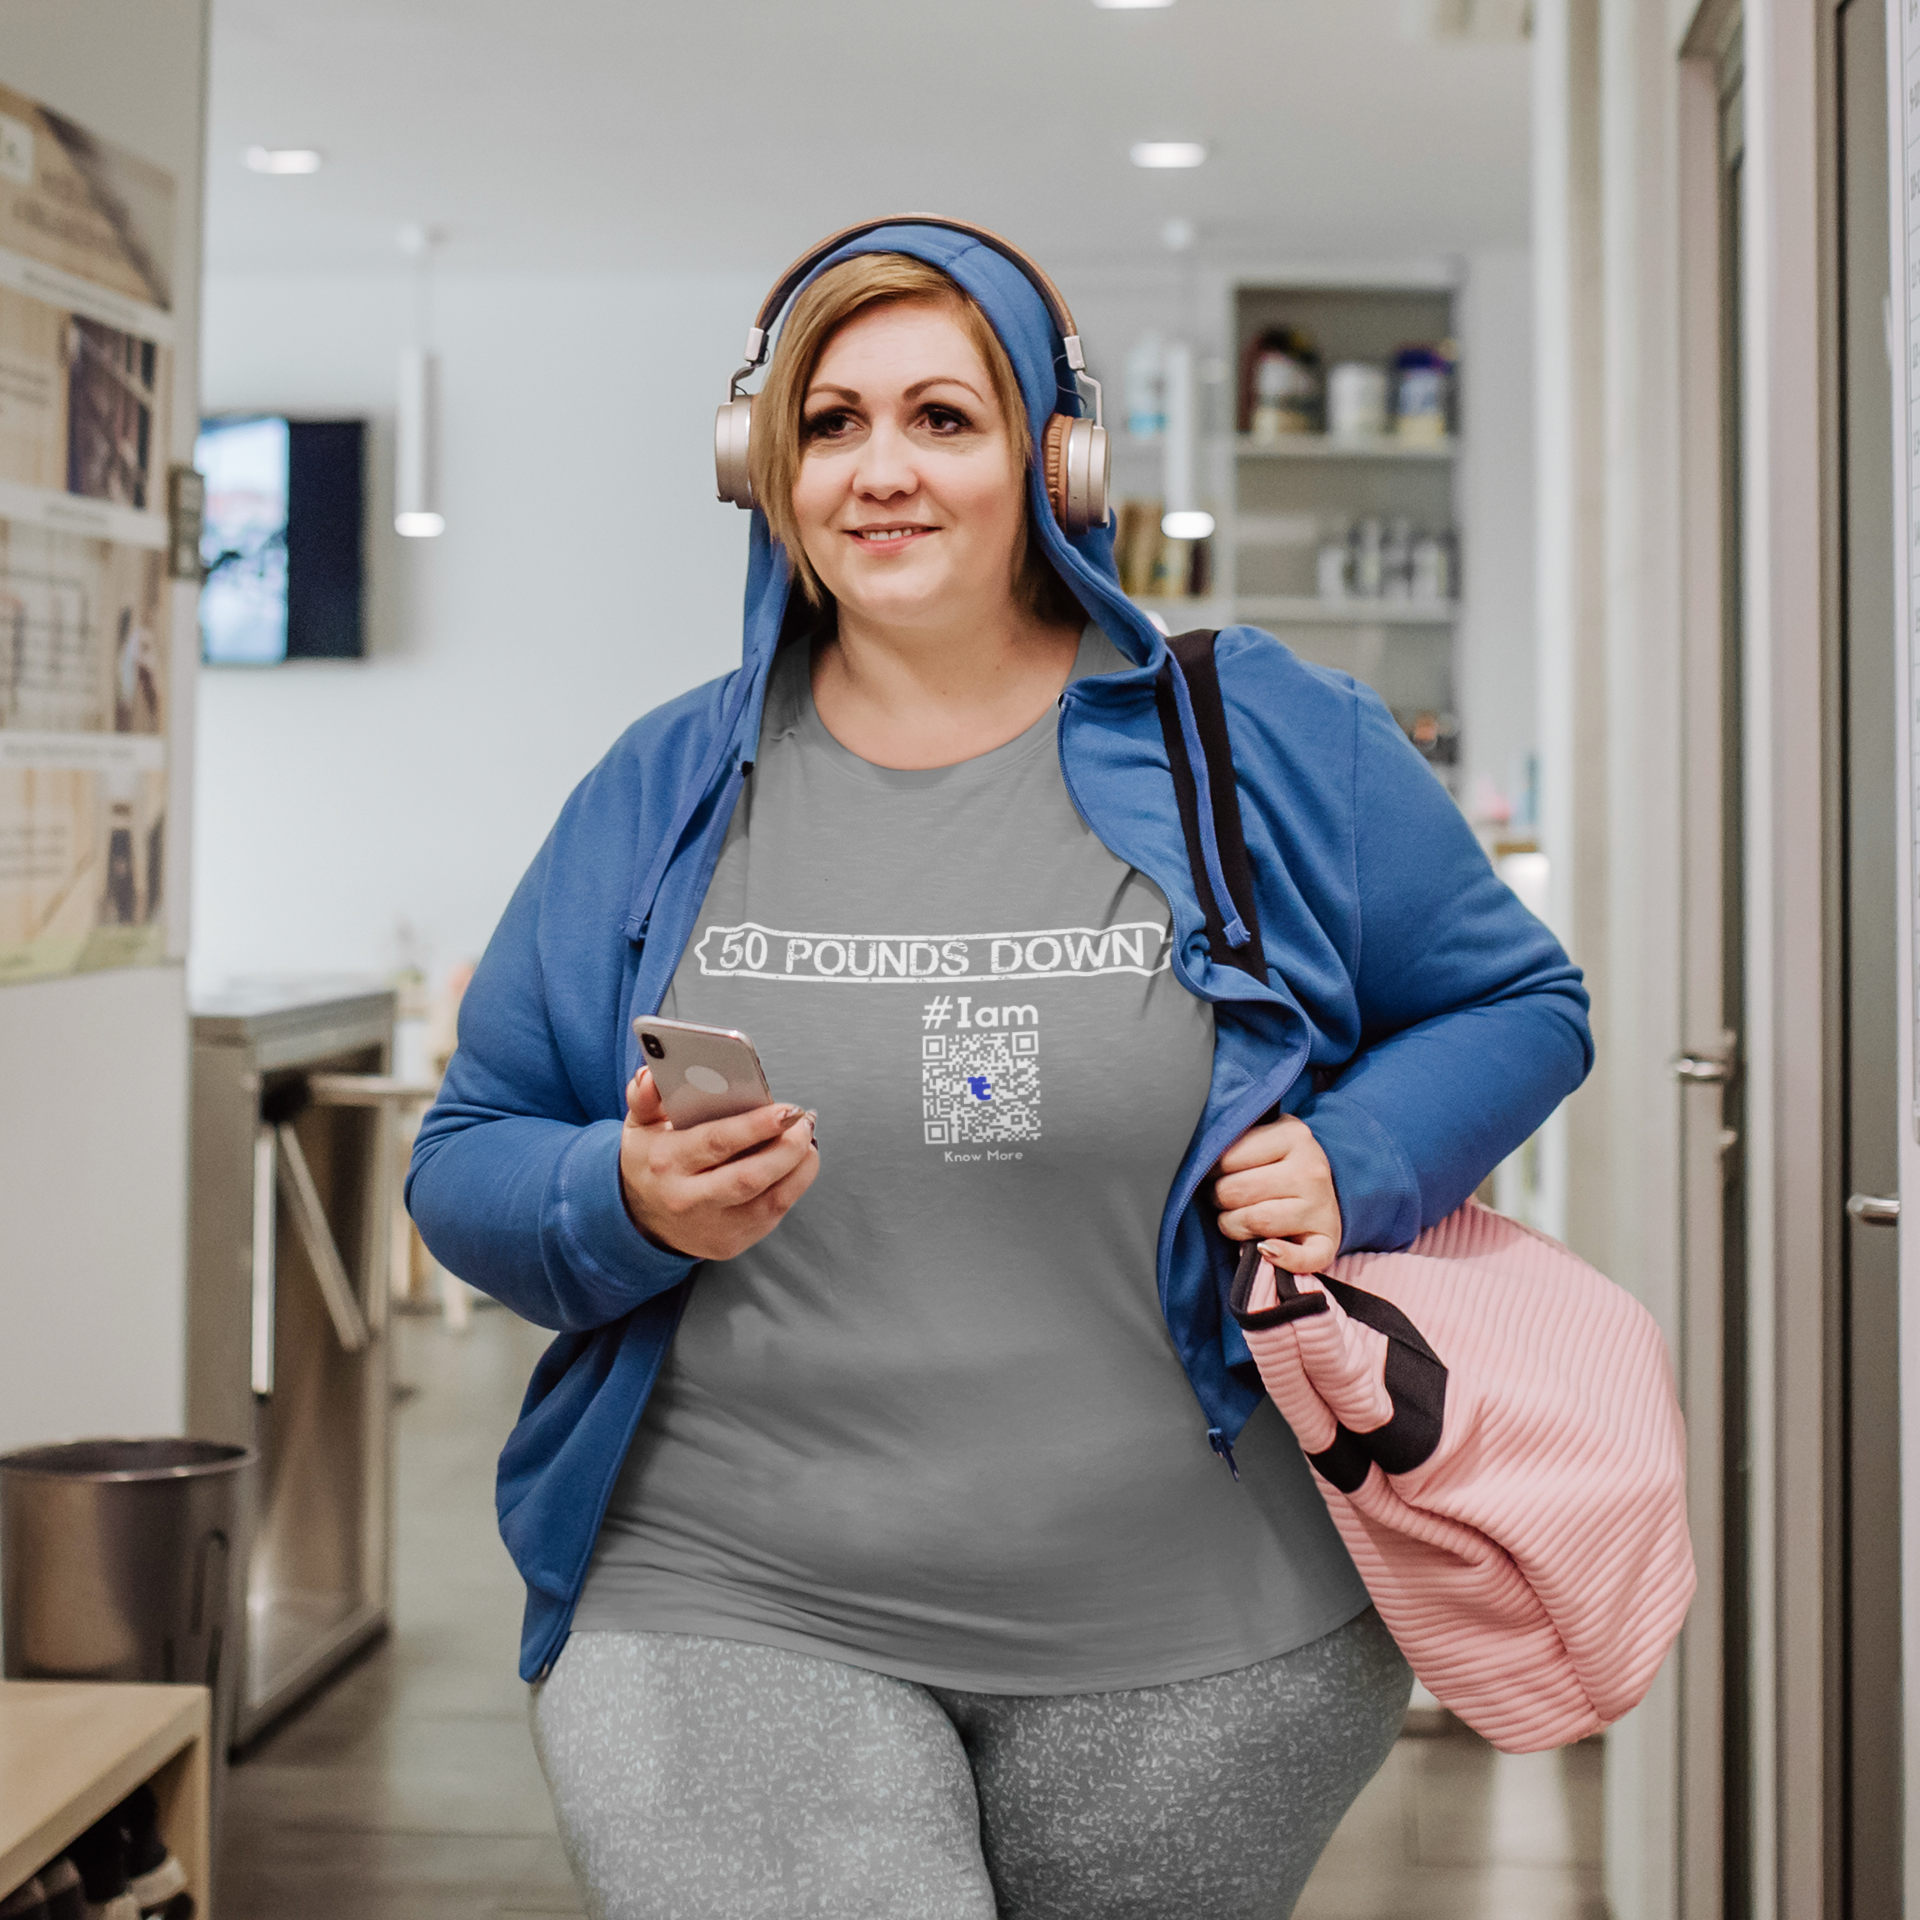 A female presenting, full figured, person is TeeCLAIMING™ as they walk indoors with a gym bag & headphones. They're wearing a gray CLAIM It Tee™ with a CLAIM™ that reads {50 POUNDS DOWN} #Iam.